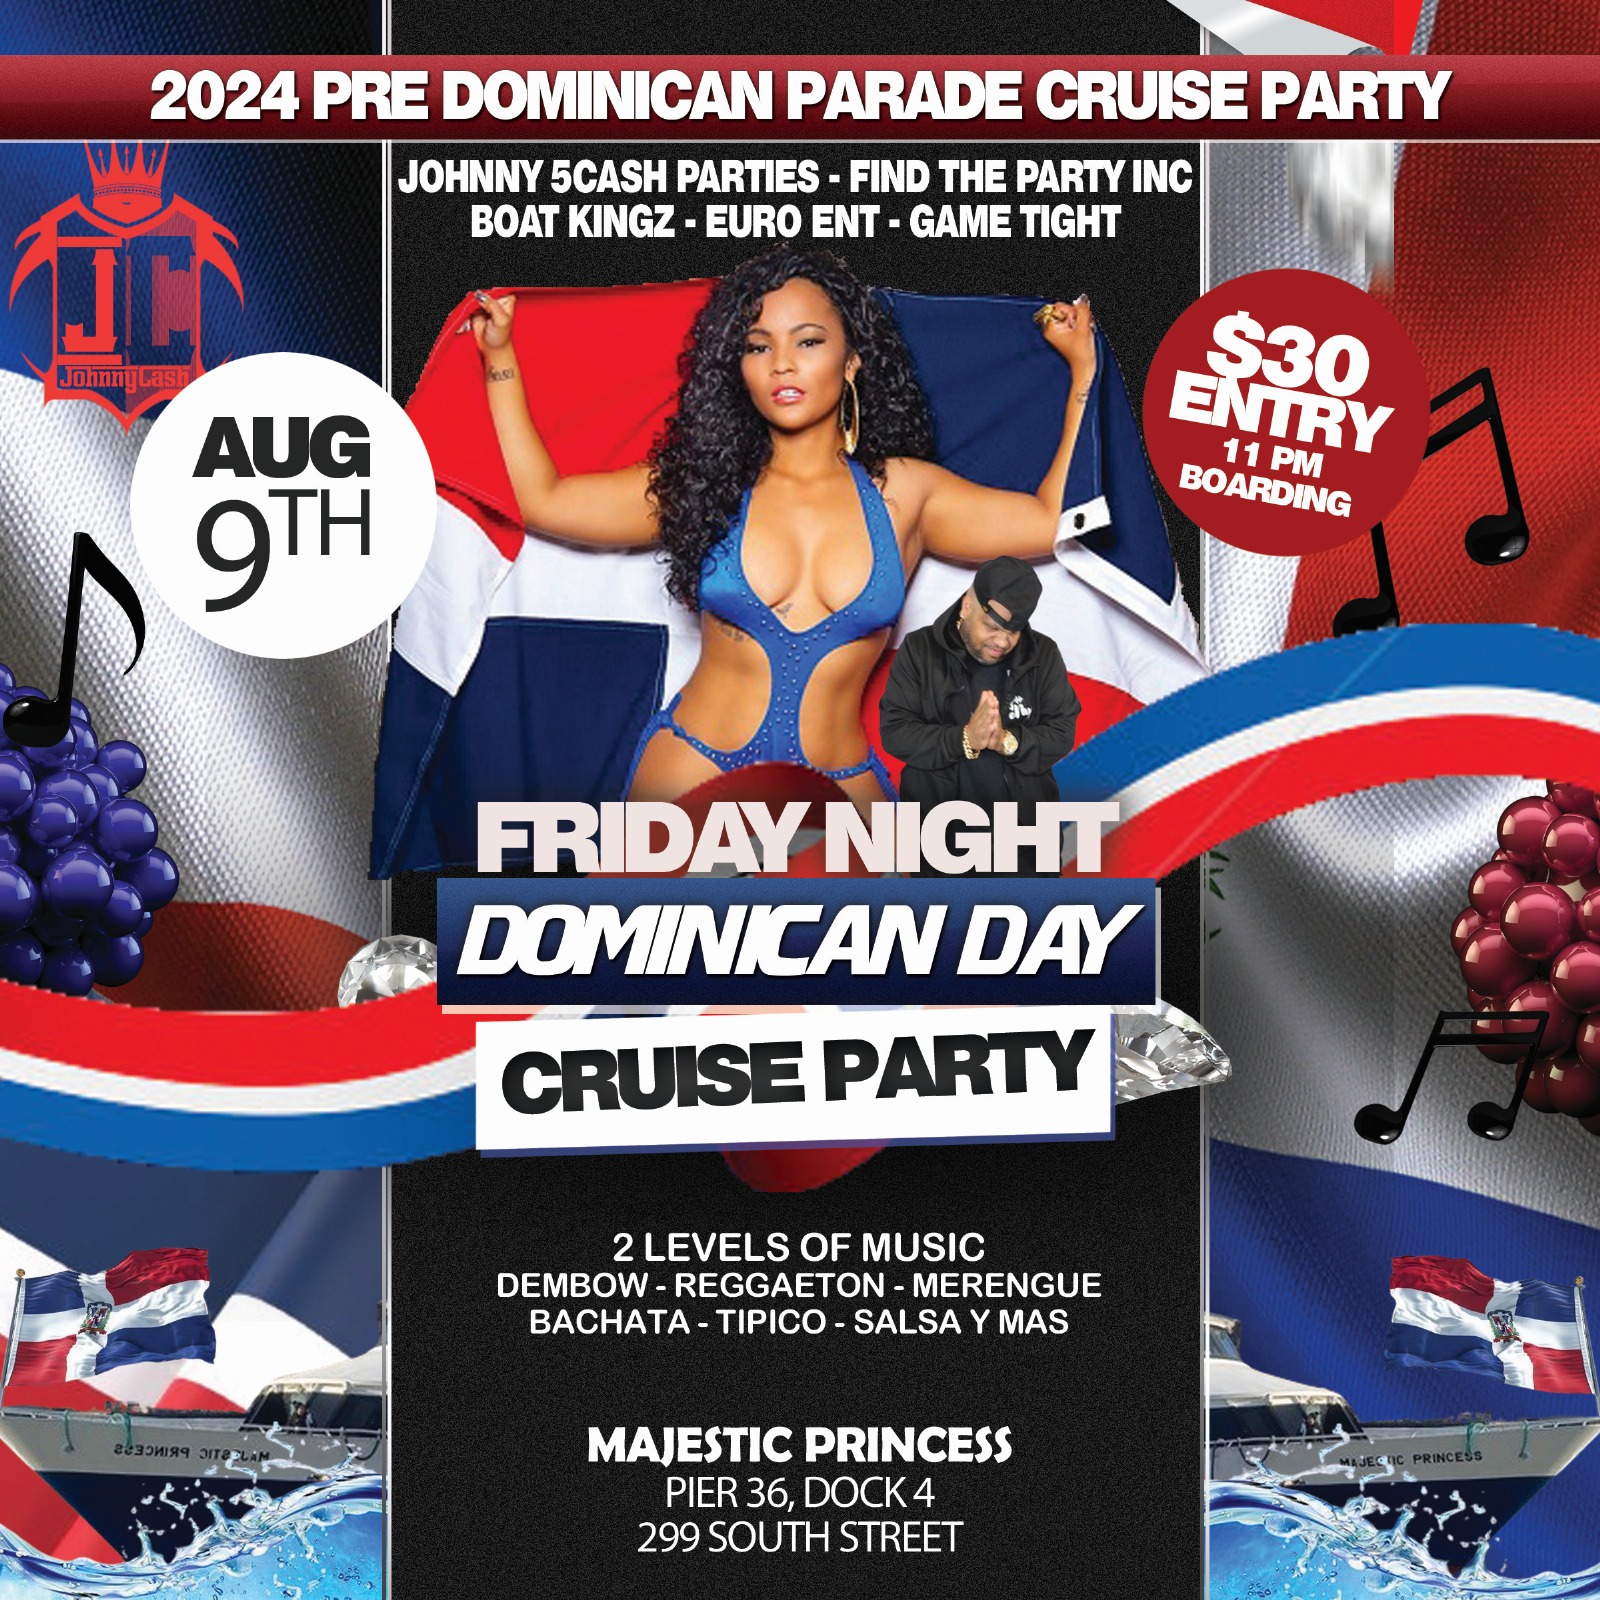 FRIDAY NIGHT DOMINICAN DAY CRUISE PARTY